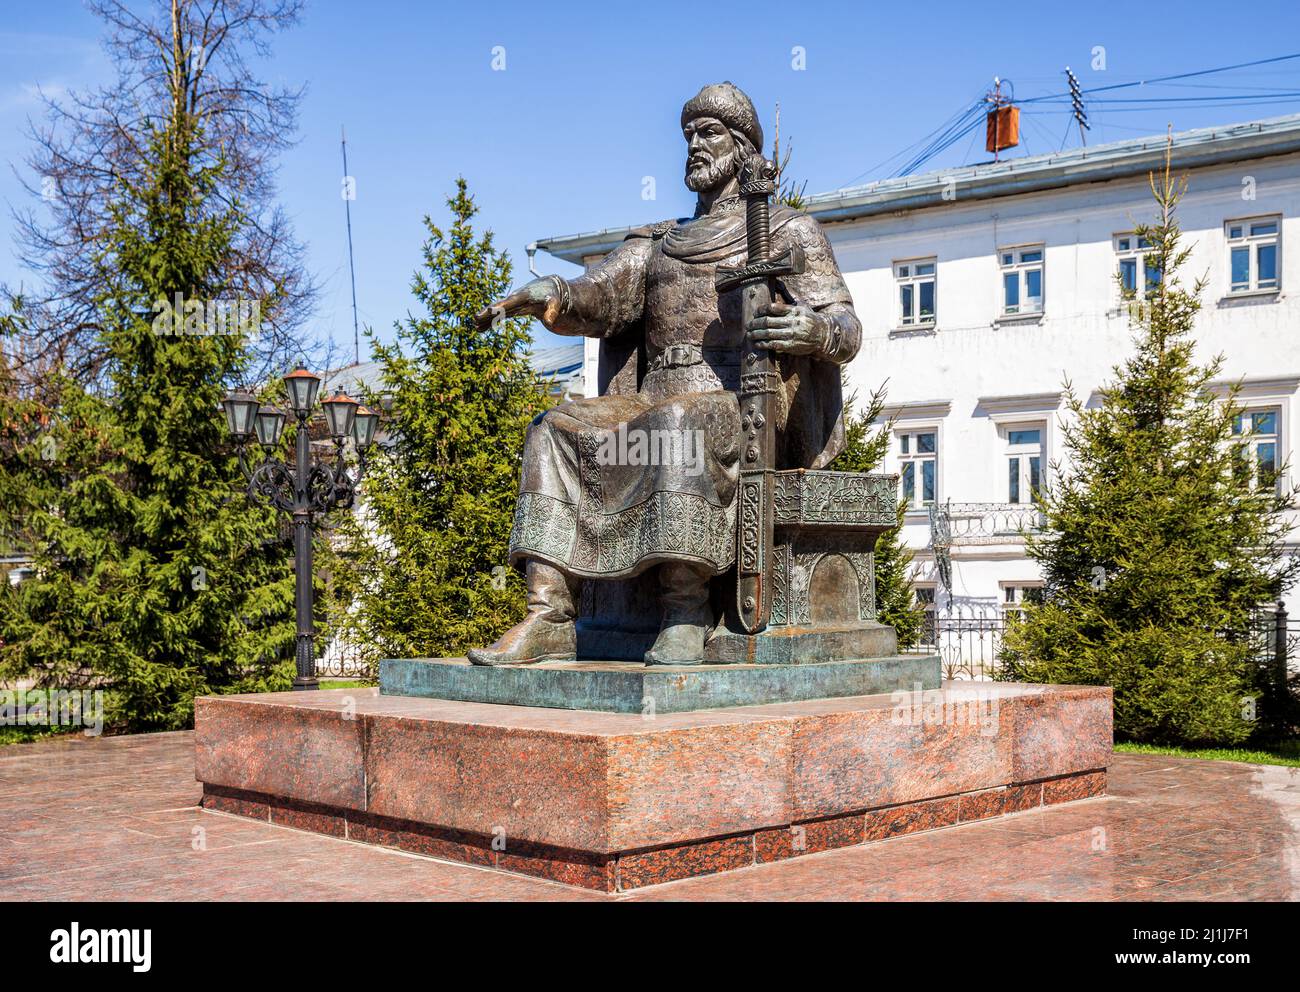 Kostroma, Russia - March, 2017: Monument to Yuri Dolgoruky, the founder of Kostroma in honor of the 850th anniversary of the city. Installed in 2003. Stock Photo